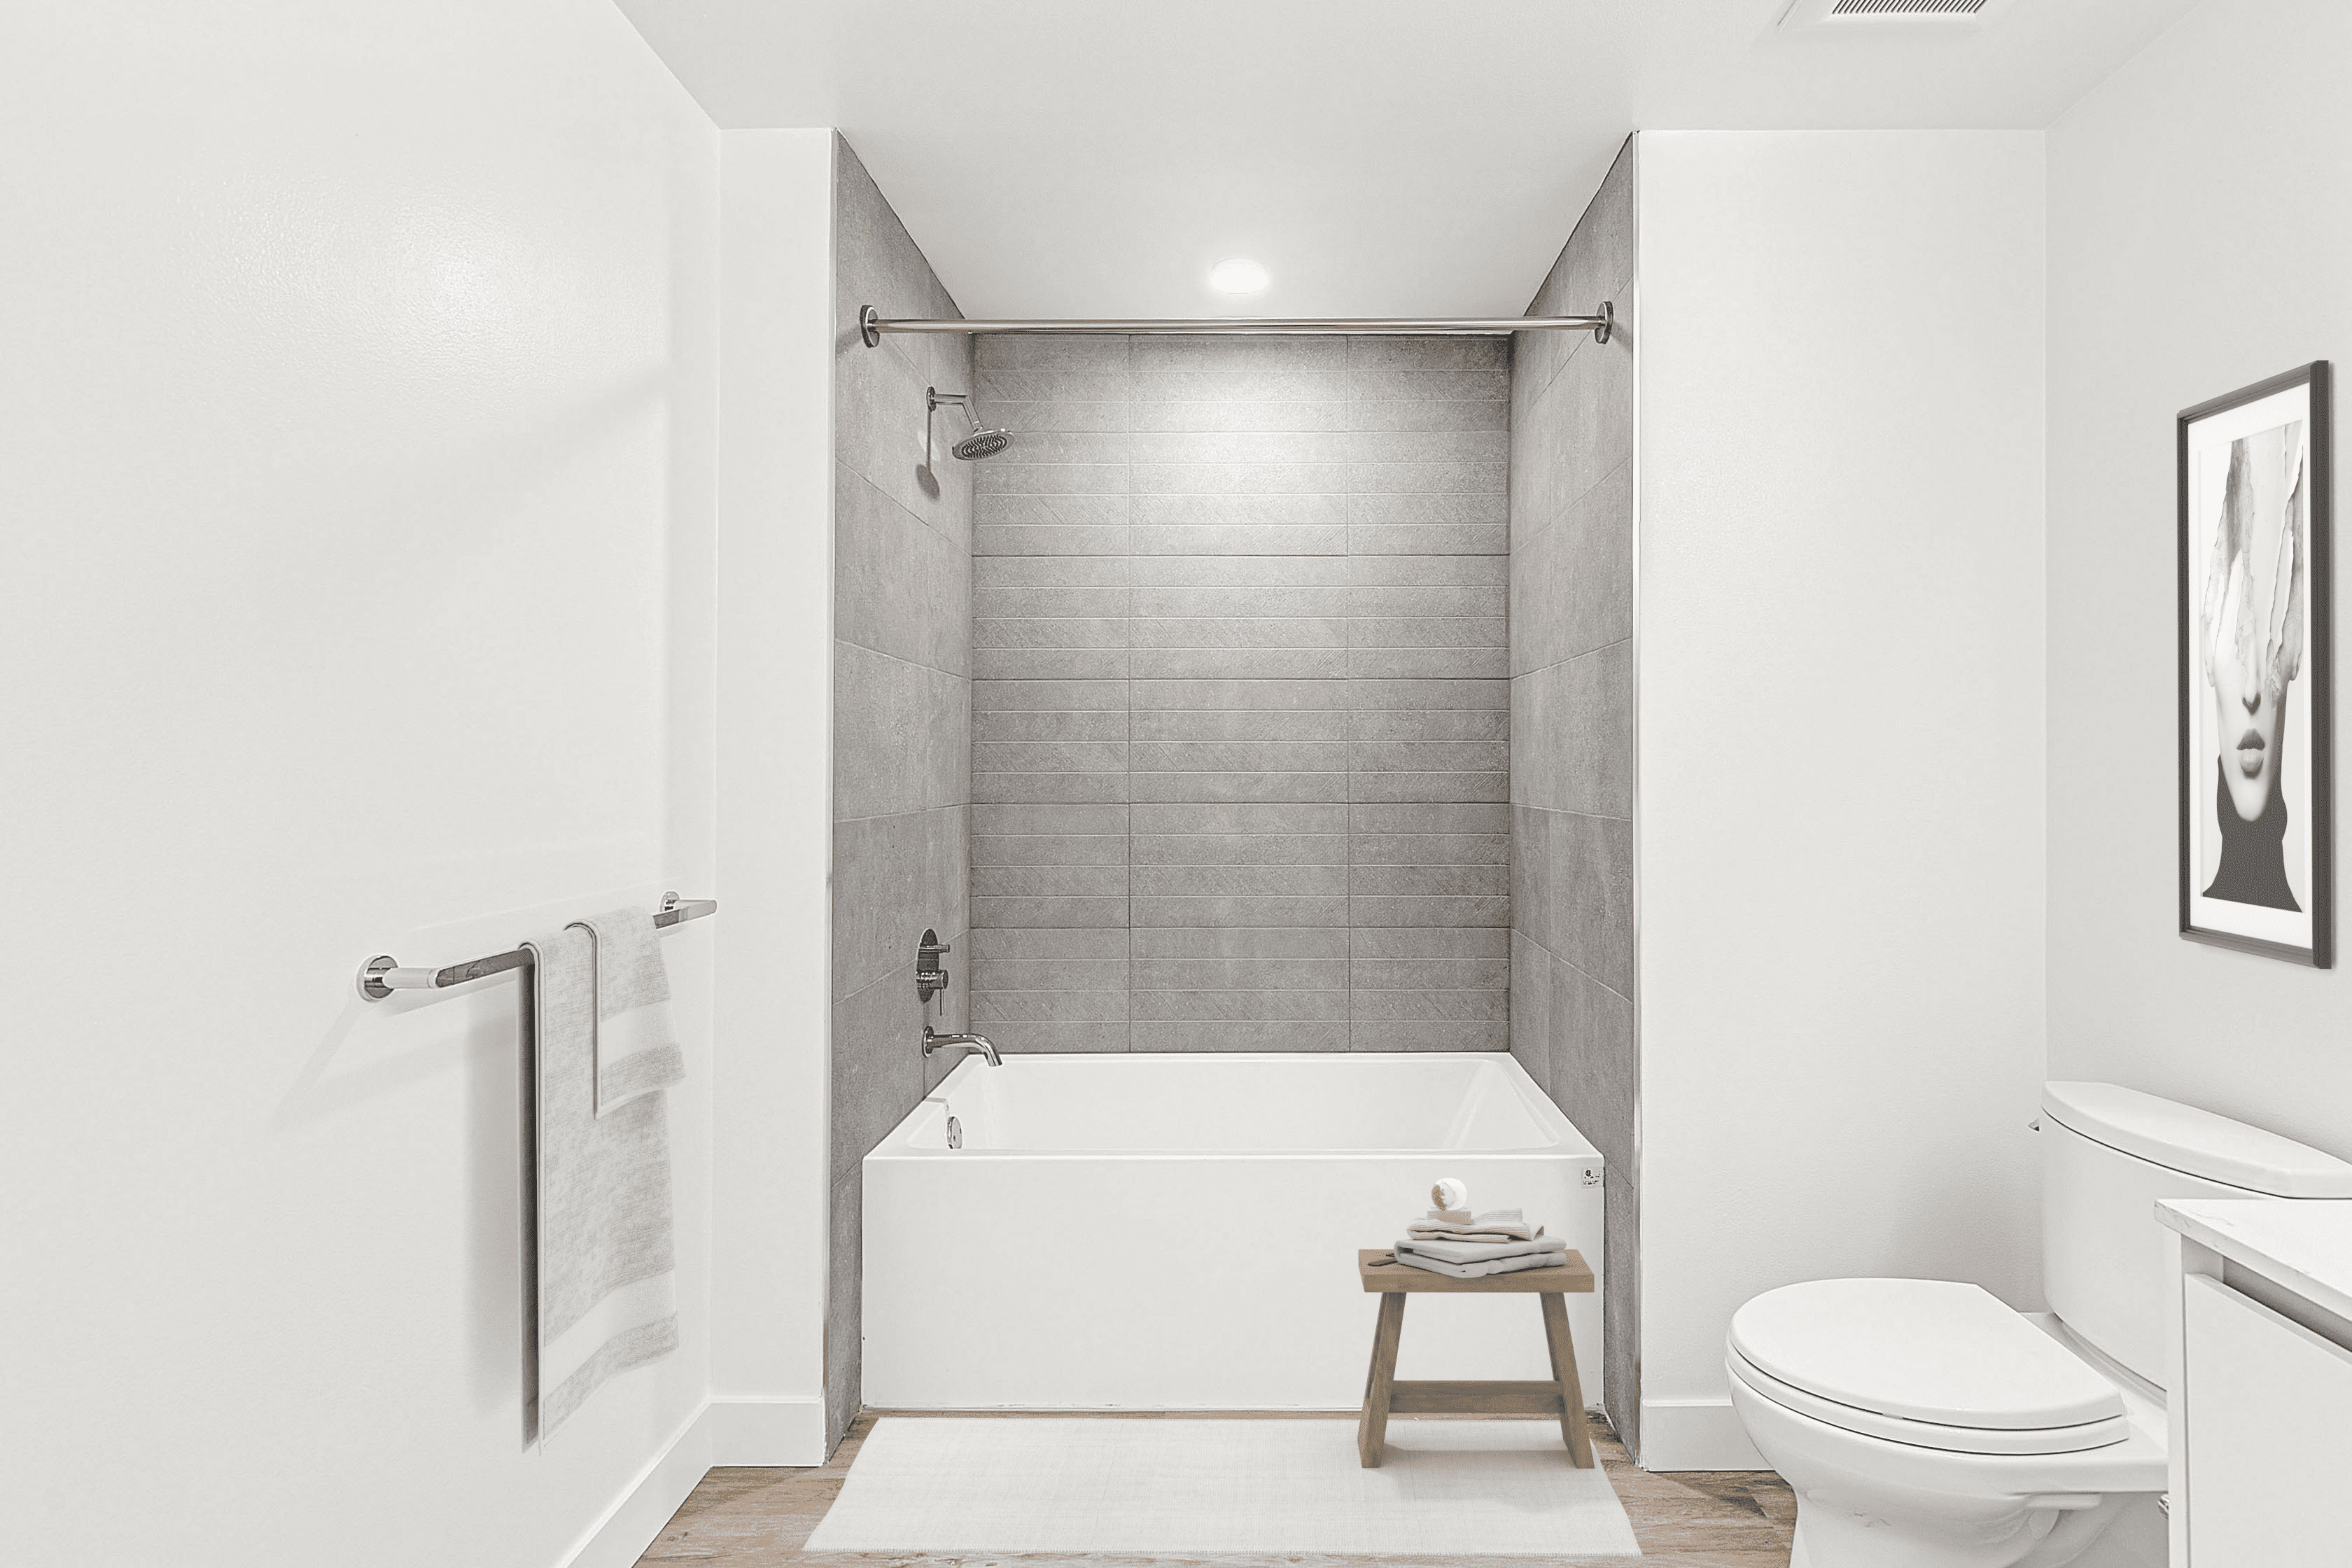 A Multifamily apartment with a bathroom featuring a toilet, sink, and tub at The Rinrose.